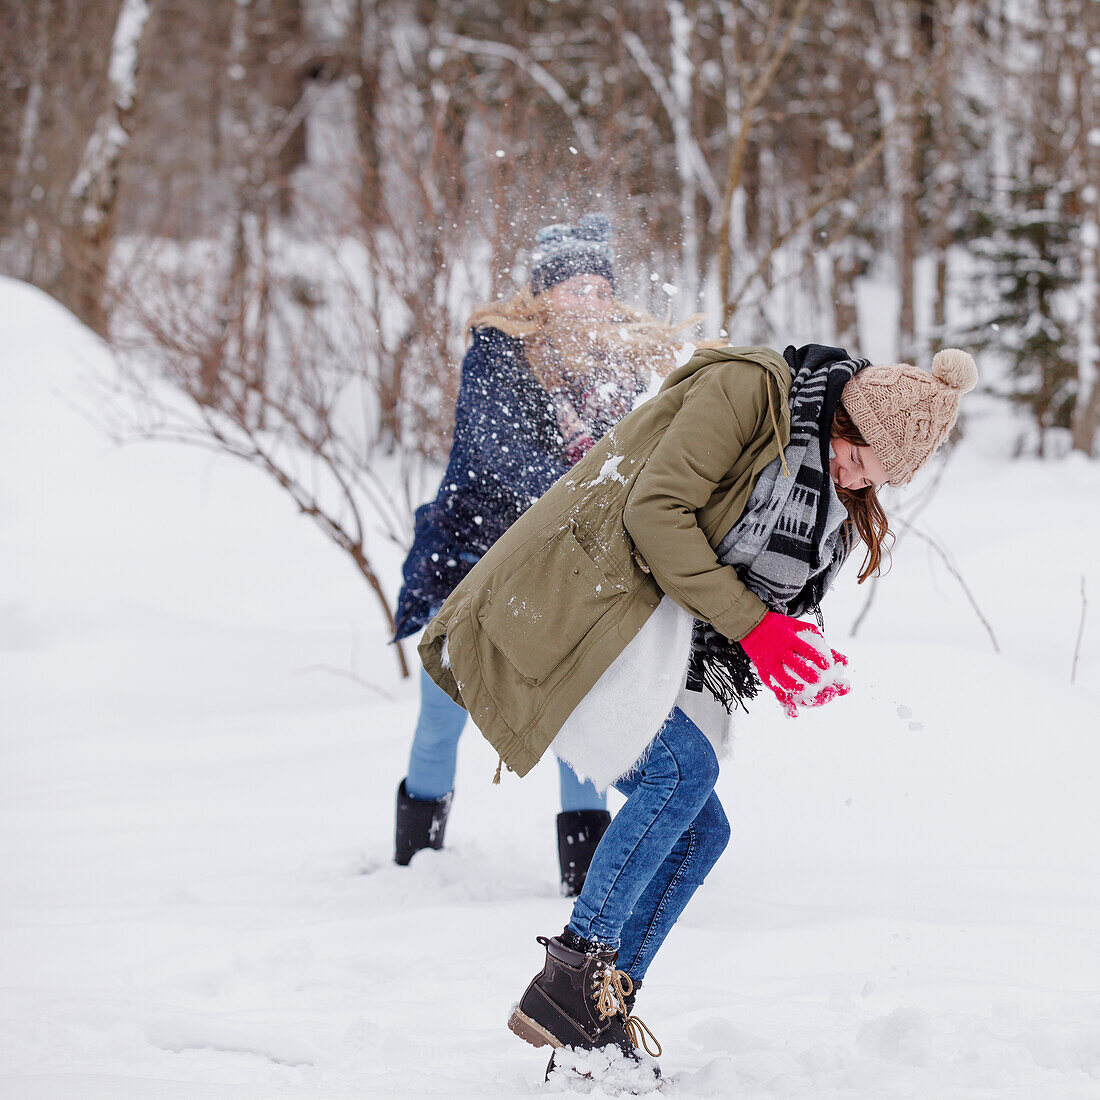 Two young women enjoying snowball fight, Spitzingsee, Upper Bavaria, Germany